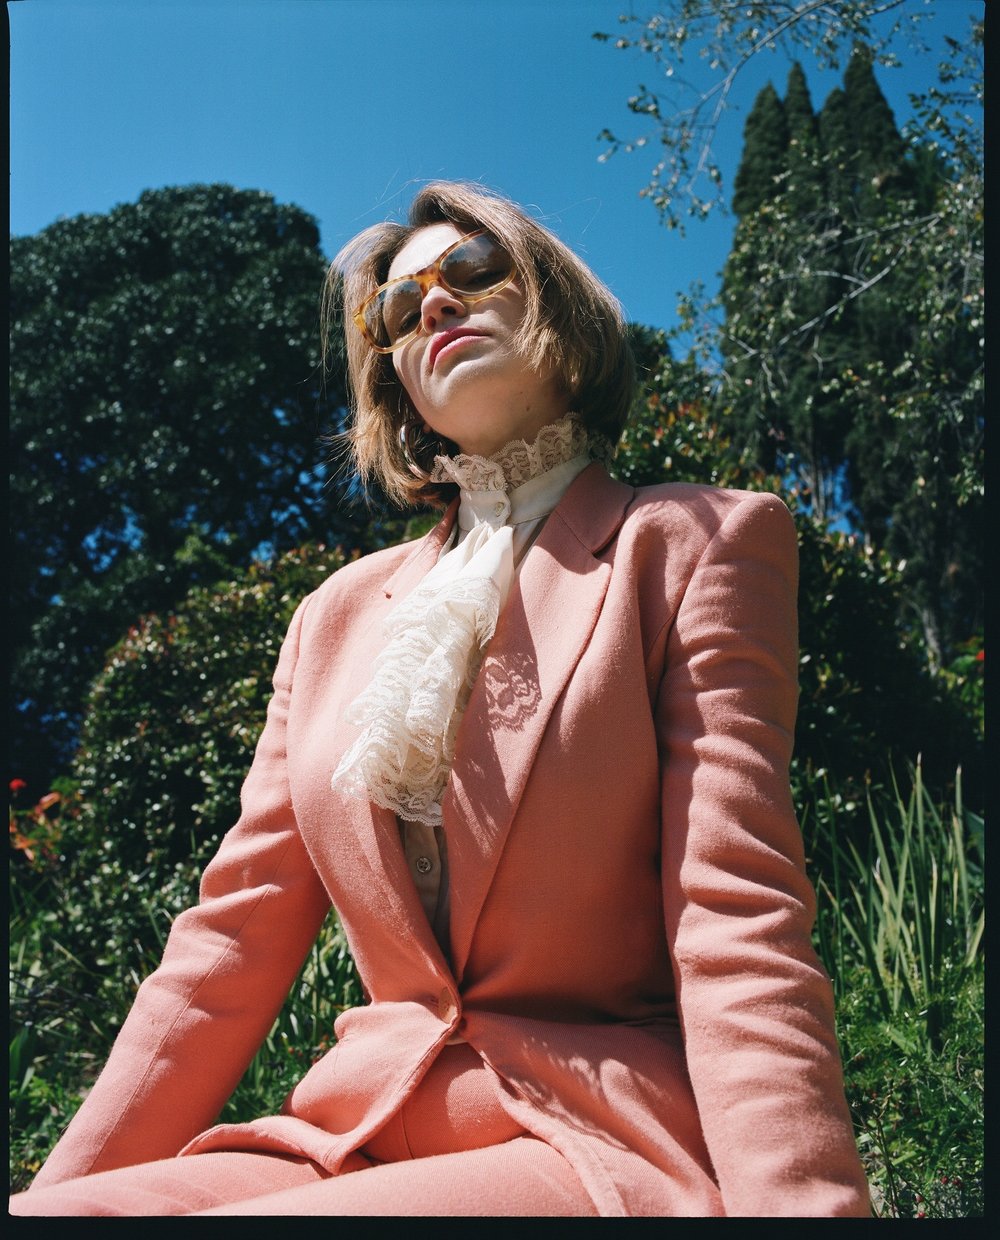 UFFIE FOR OFFICE MAGAZINE. MARCH 2019